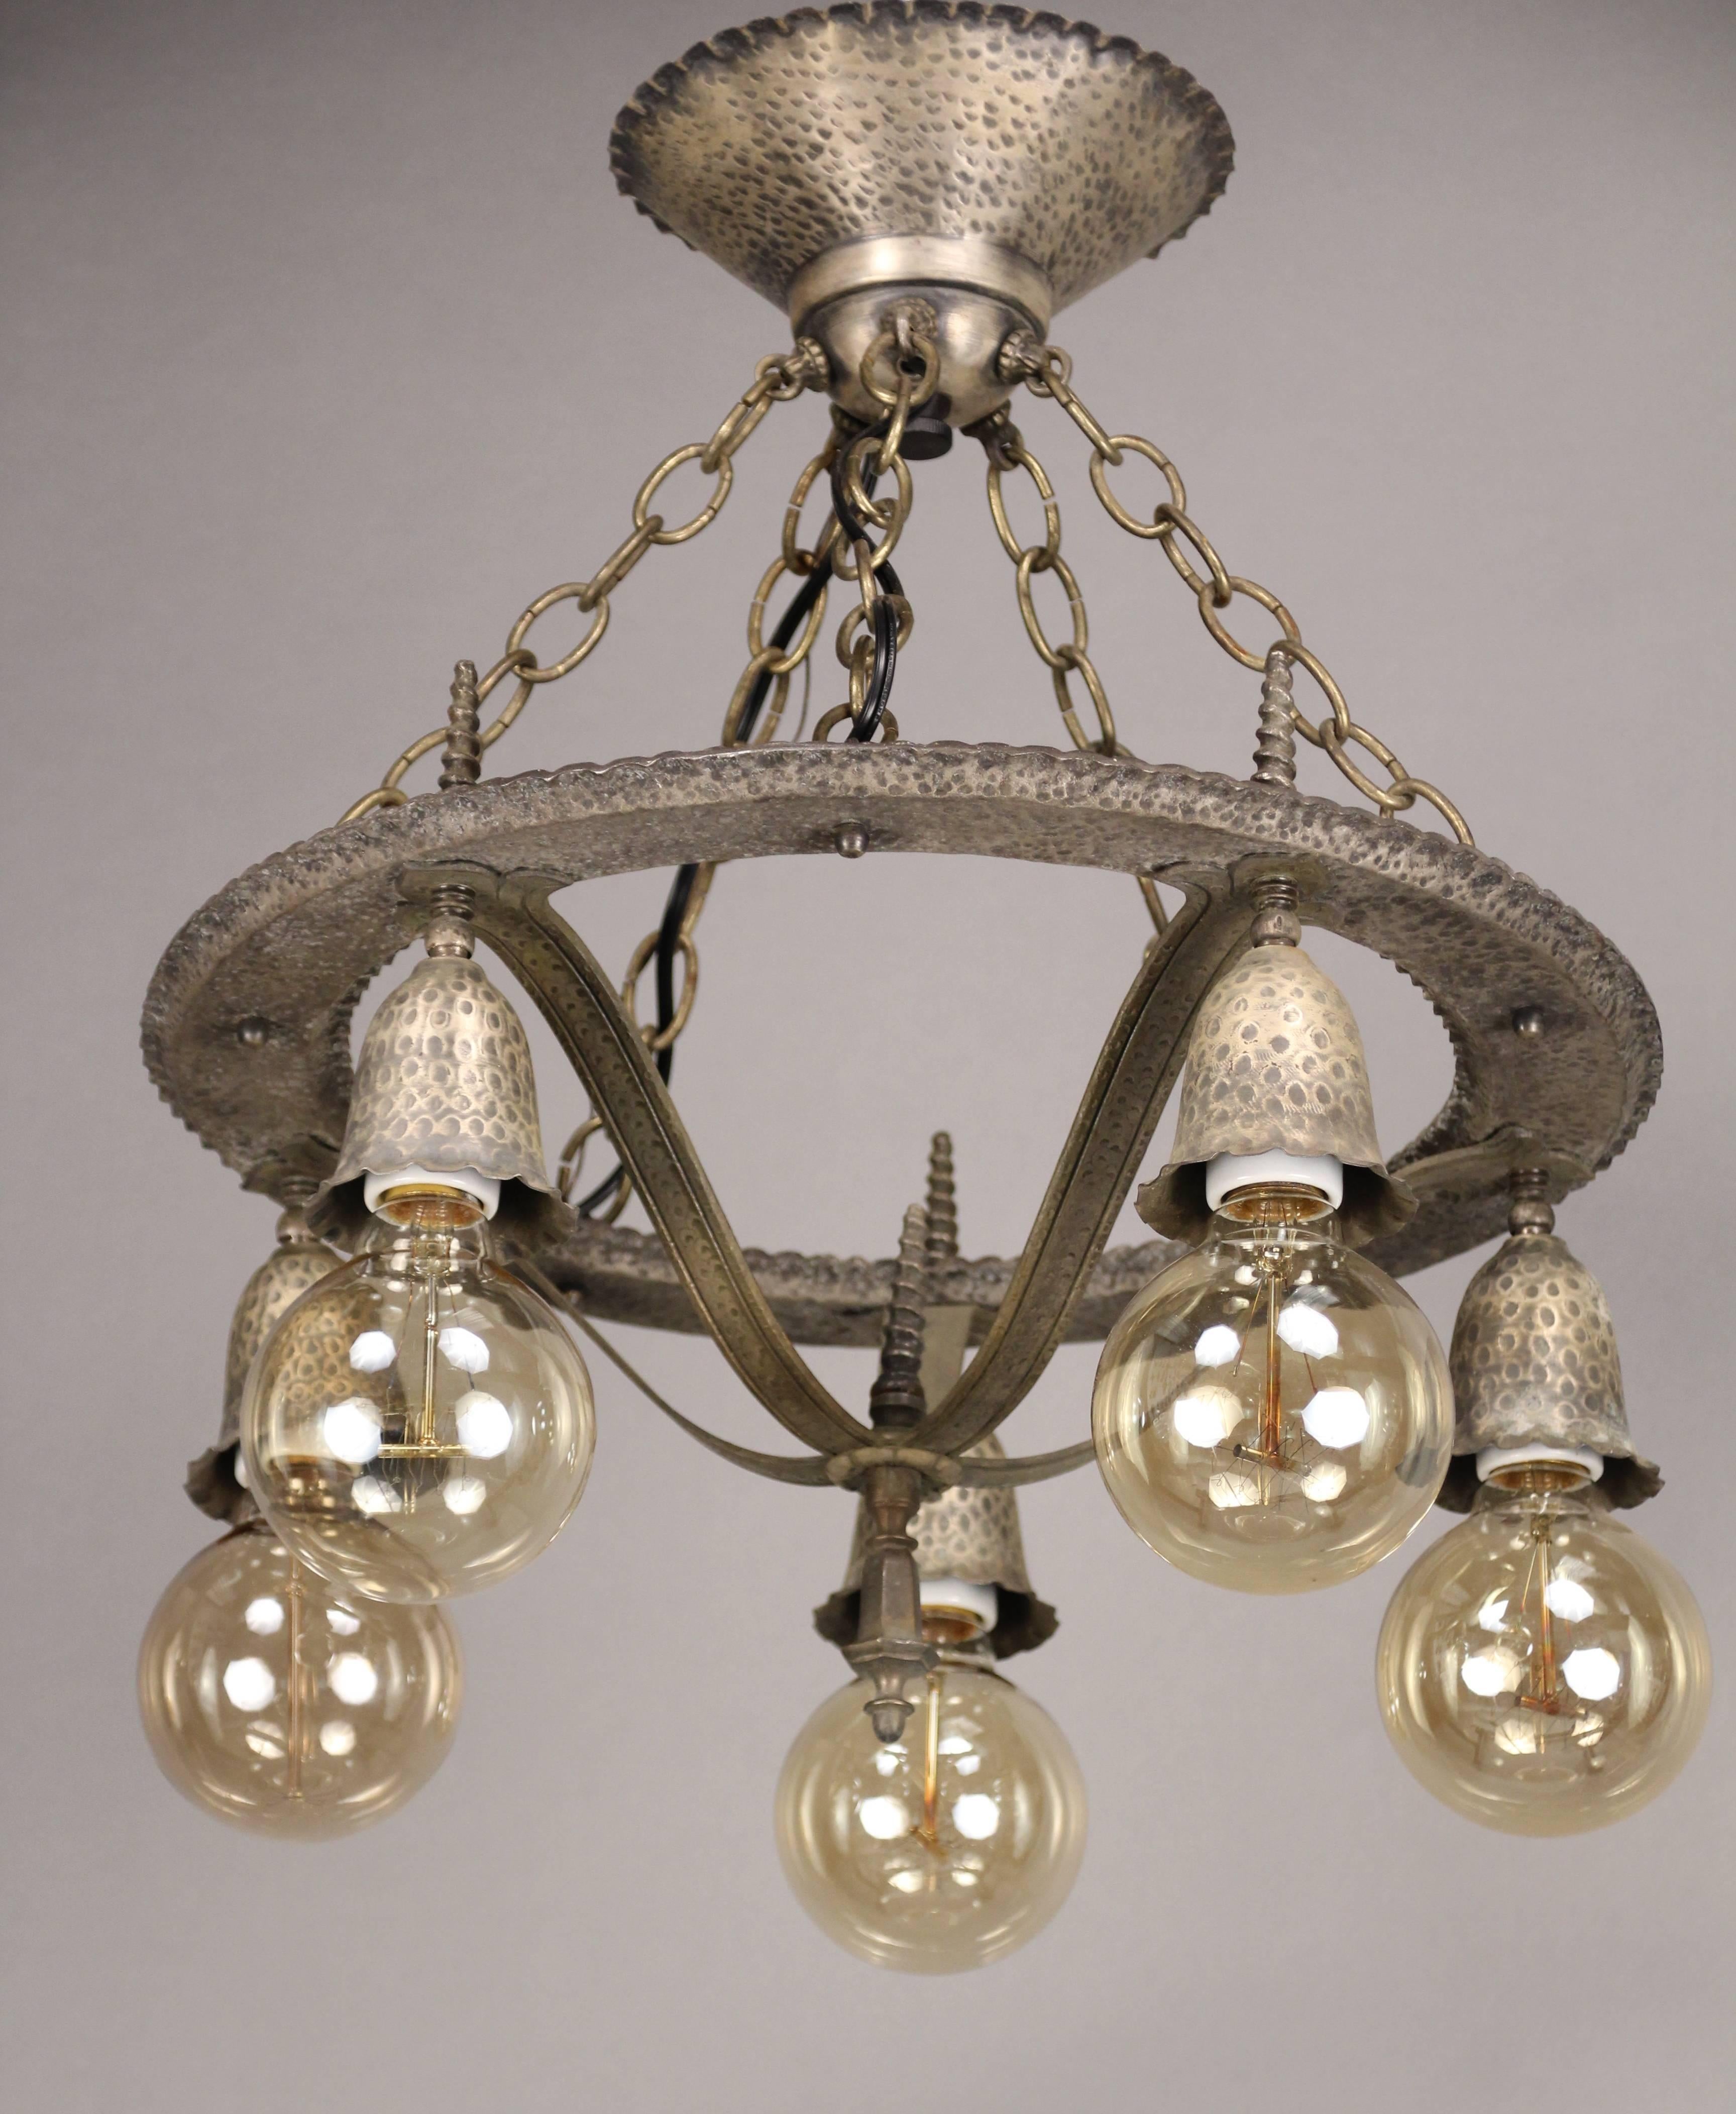 Downlight chandelier with pewter colored finish. This dates to the 1920s and fits nicely in Tudor, Arts & Crafts and Spanish decor. Measures: 19